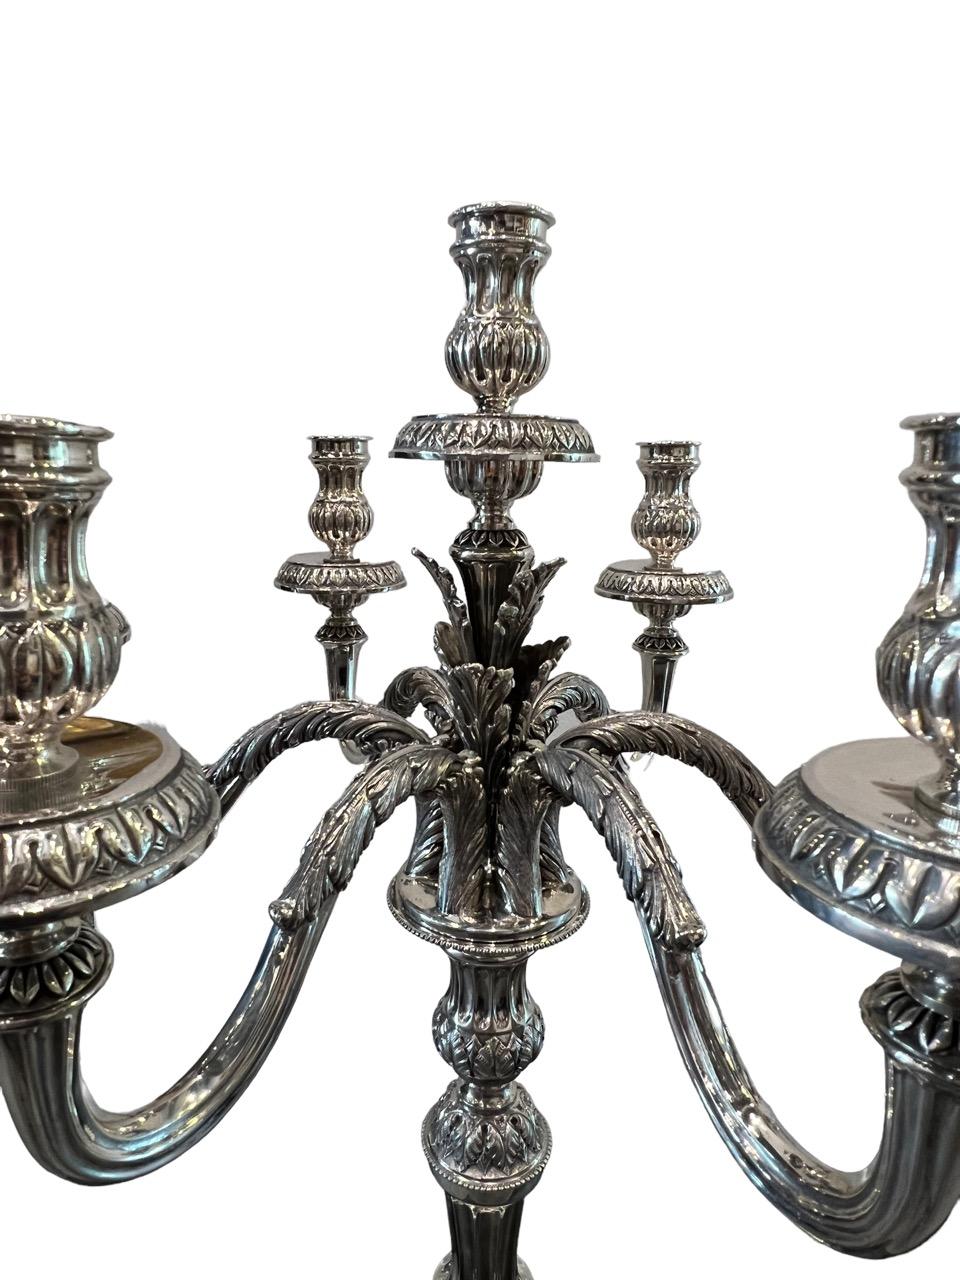 1910 Italian Pair of Sterling Silver Candelabras, Tall and Heavy 13